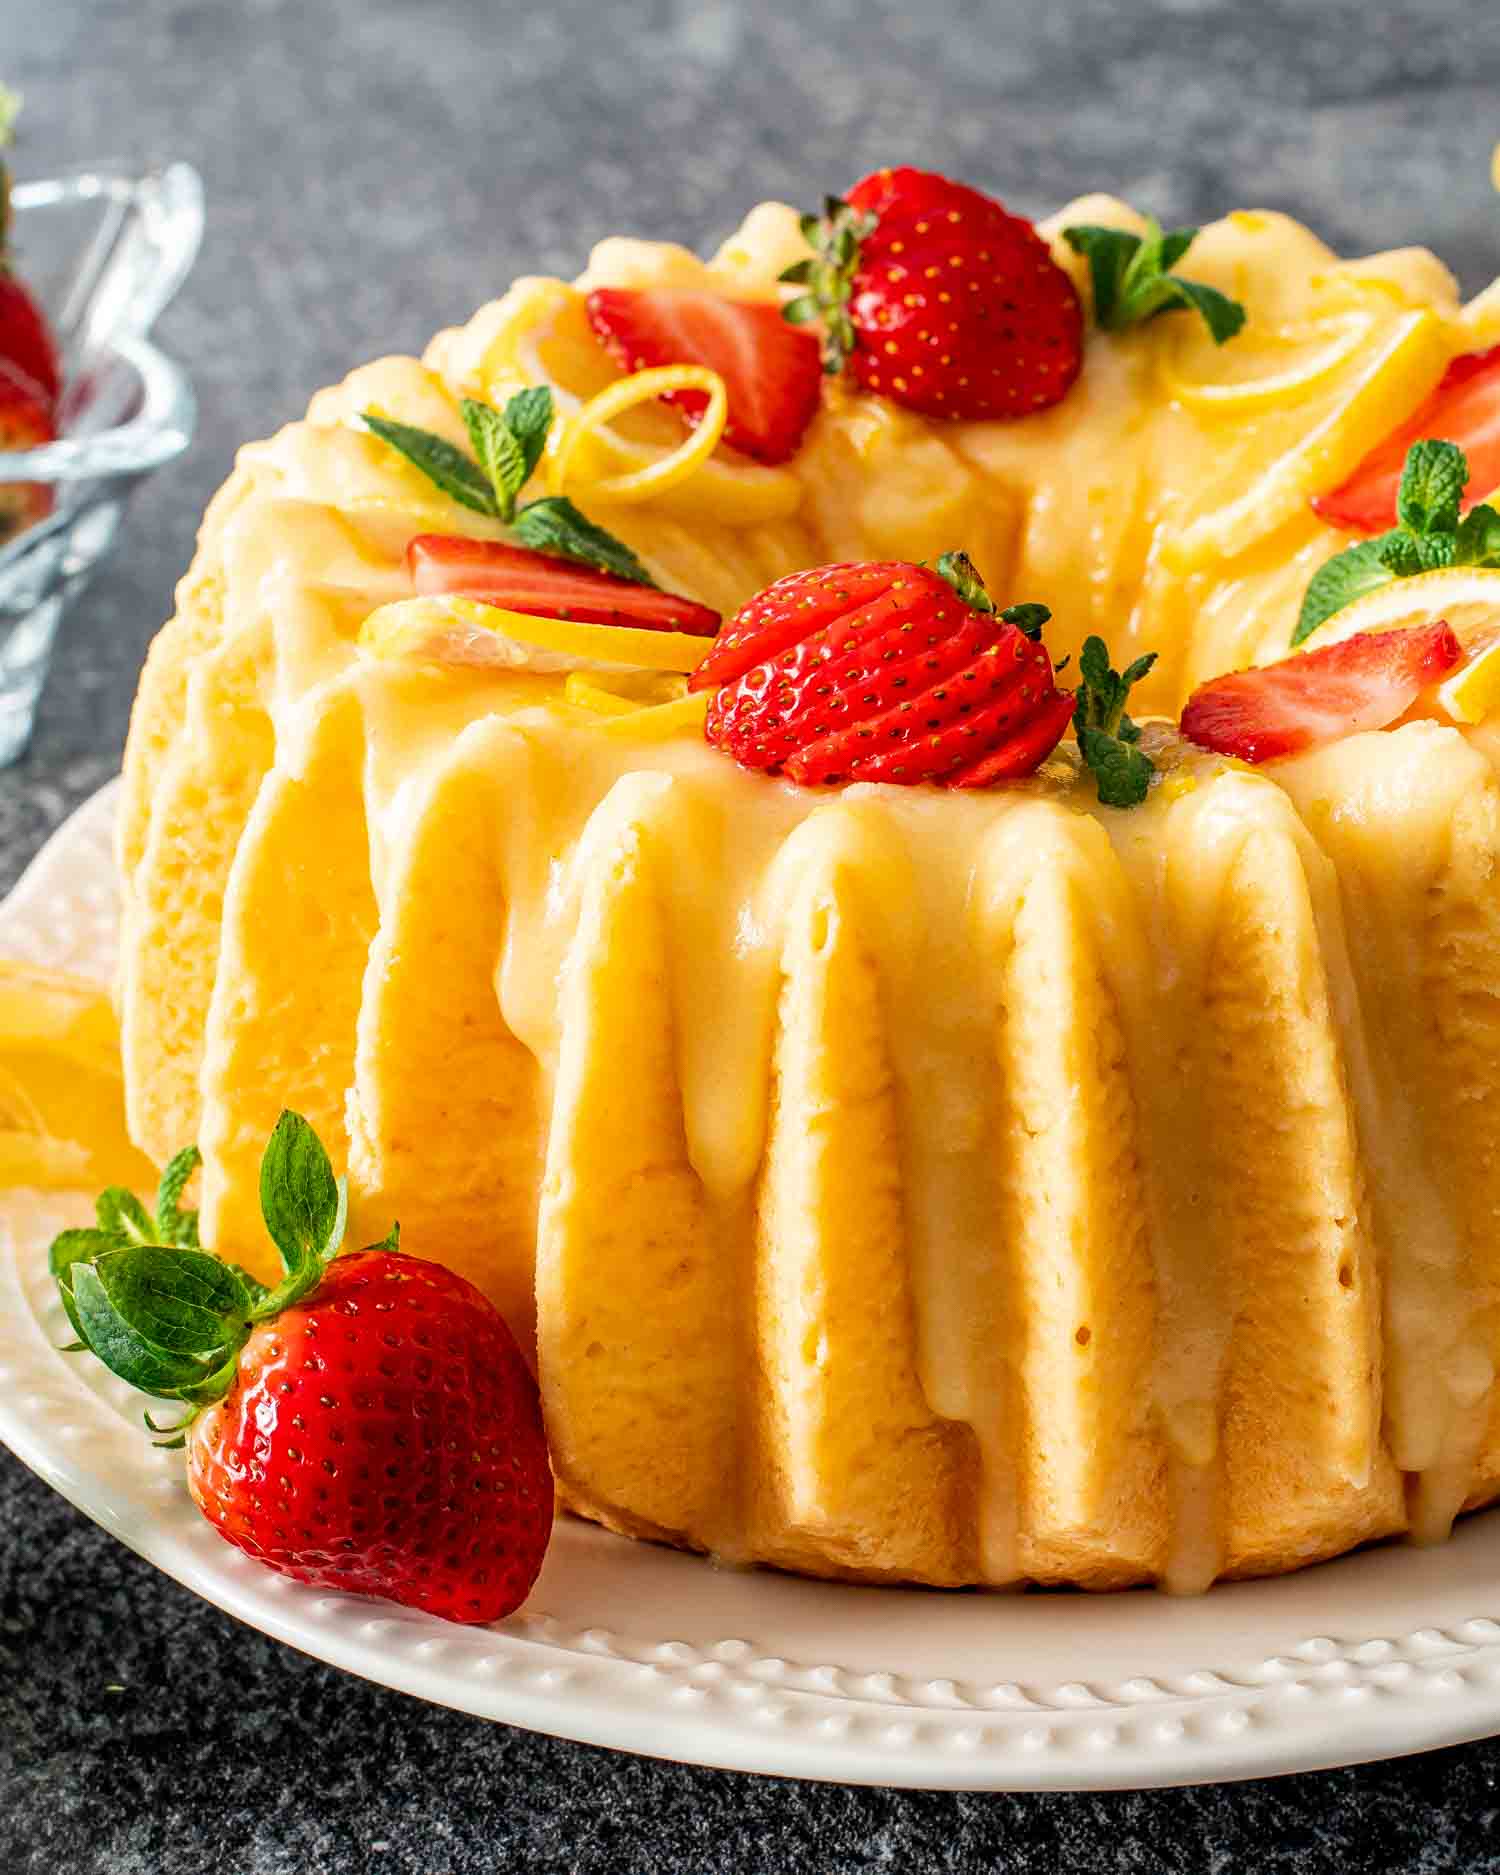 a lemon chiffon cake on a platter garnished with lemon slices and strawberries.